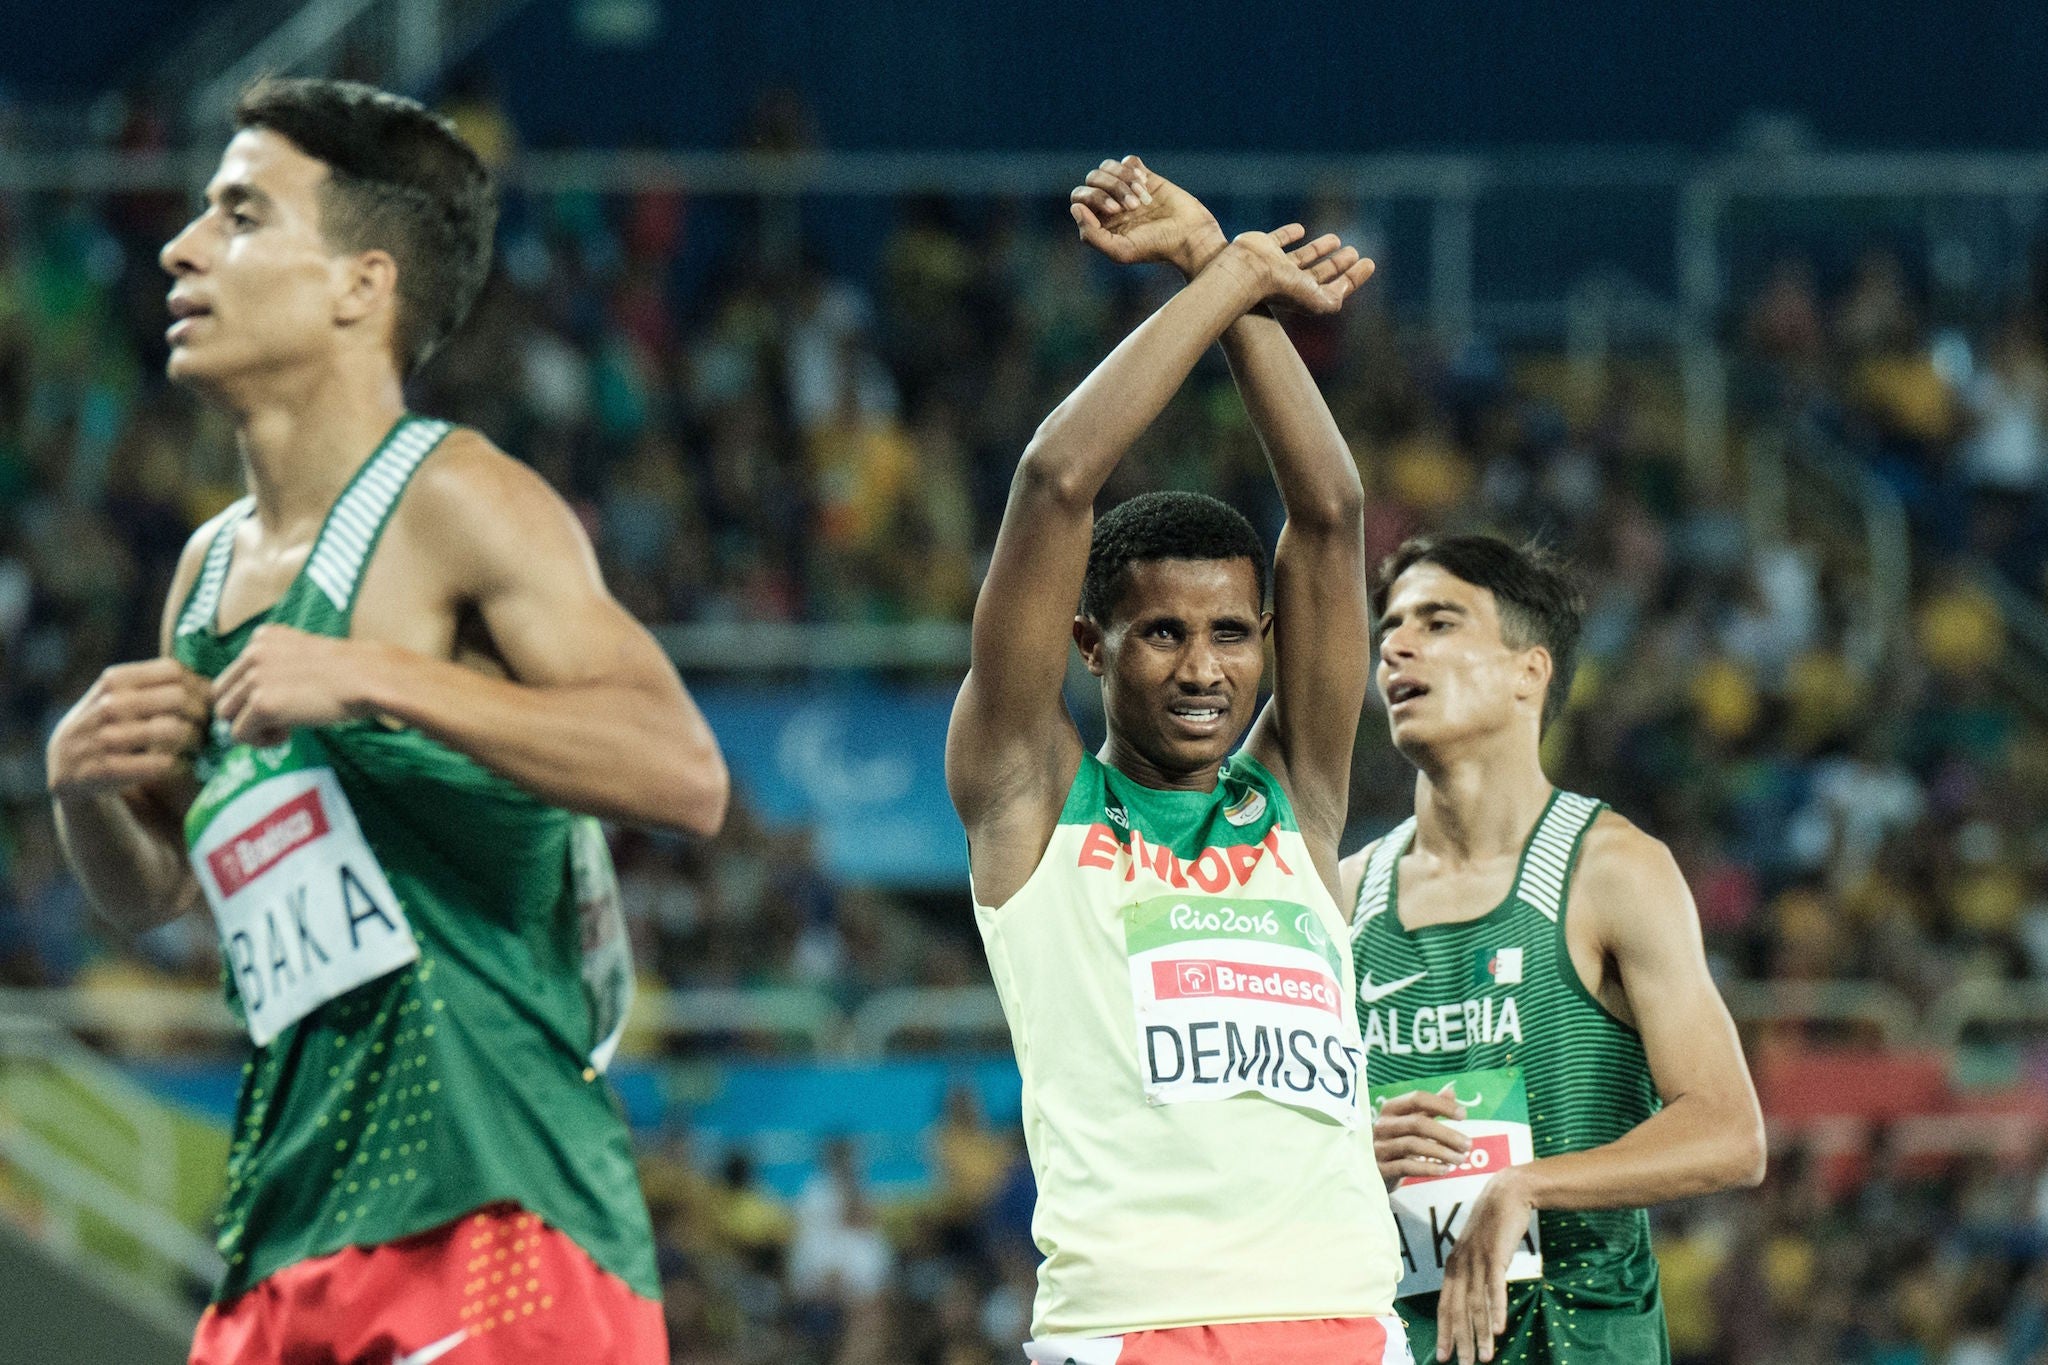 Ethiopia's Tamiru Demisse (C) reacts after the final of men's 1500 m (T13) of the Rio 2016 Paralympic Games at the Olympic stadium in Rio de Janeiro on September 11, 2016